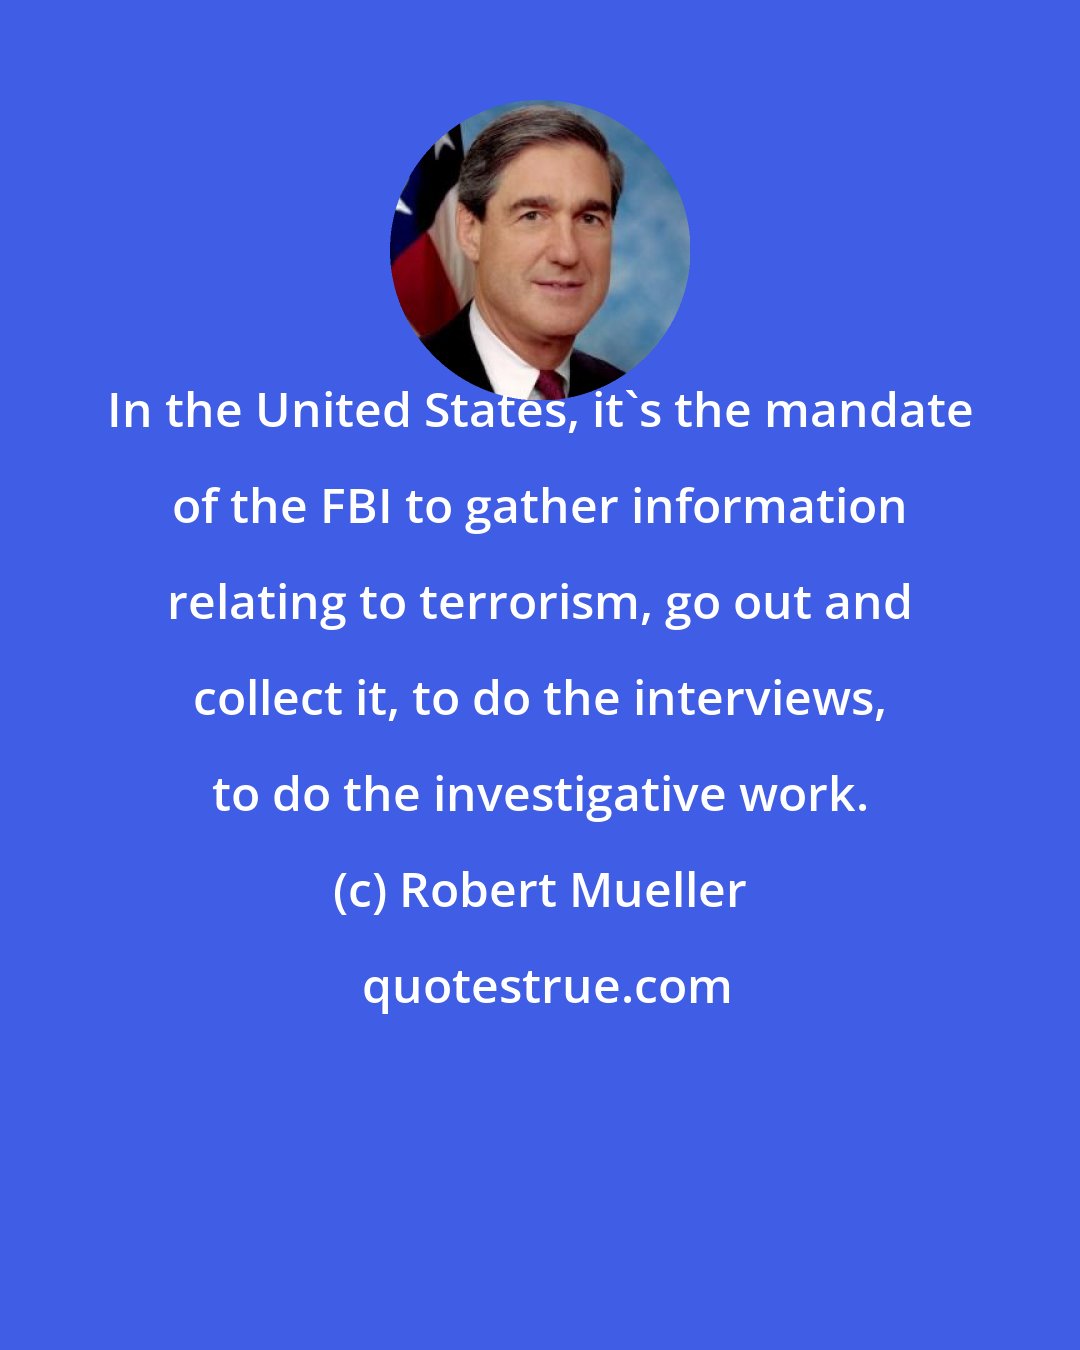 Robert Mueller: In the United States, it's the mandate of the FBI to gather information relating to terrorism, go out and collect it, to do the interviews, to do the investigative work.